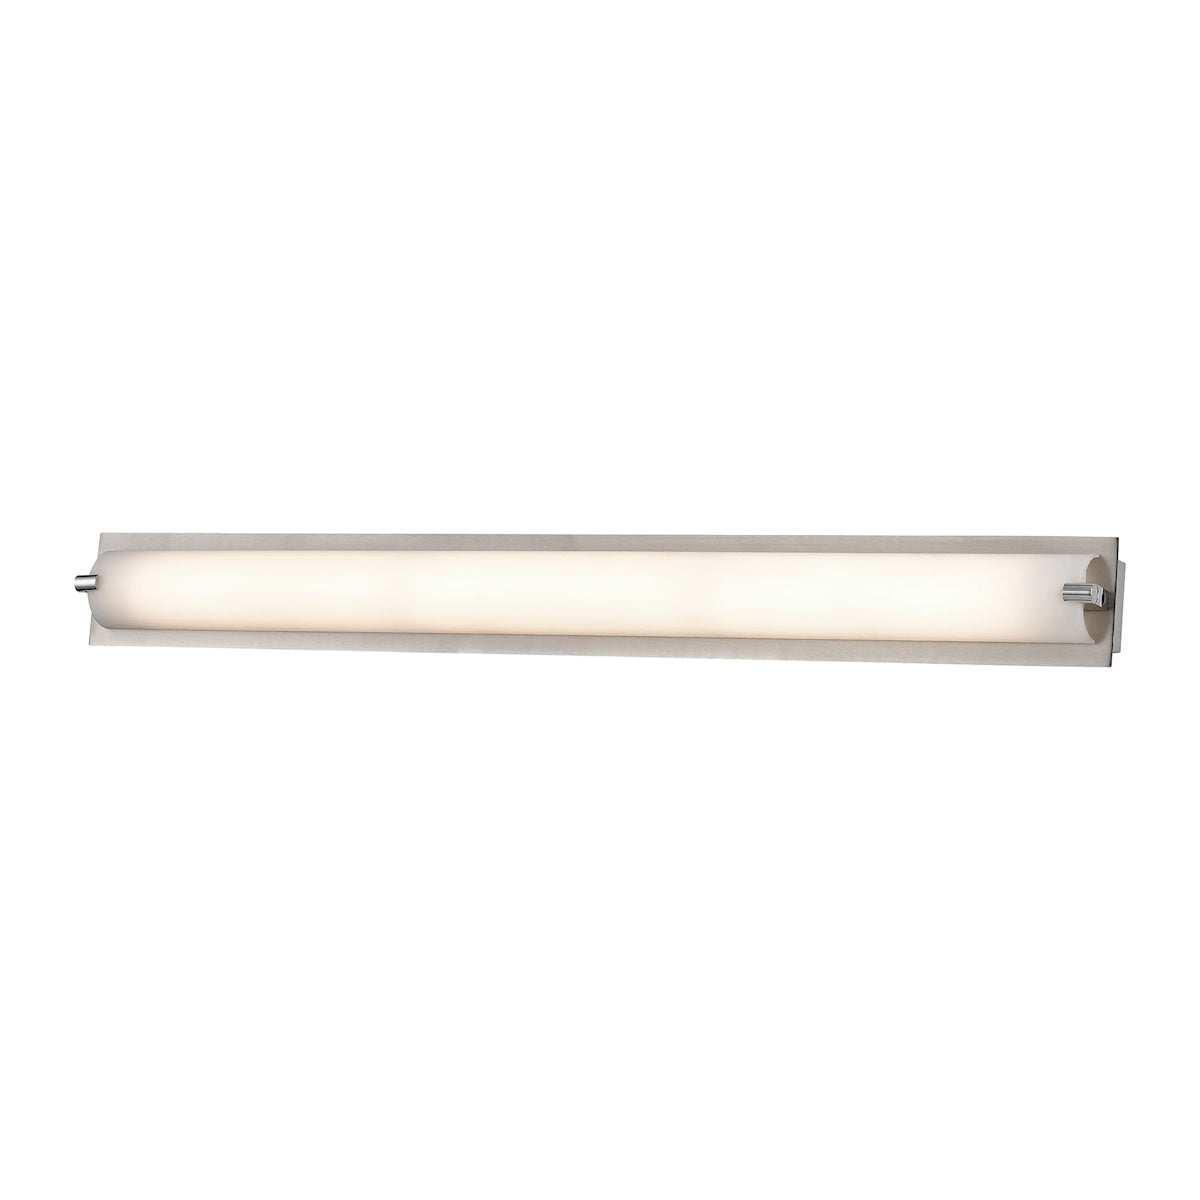 ELK Lighting WS4525-5-16M Piper 1-Light Vanity Sconce in Satin Nickel with Frosted Glass - Medium